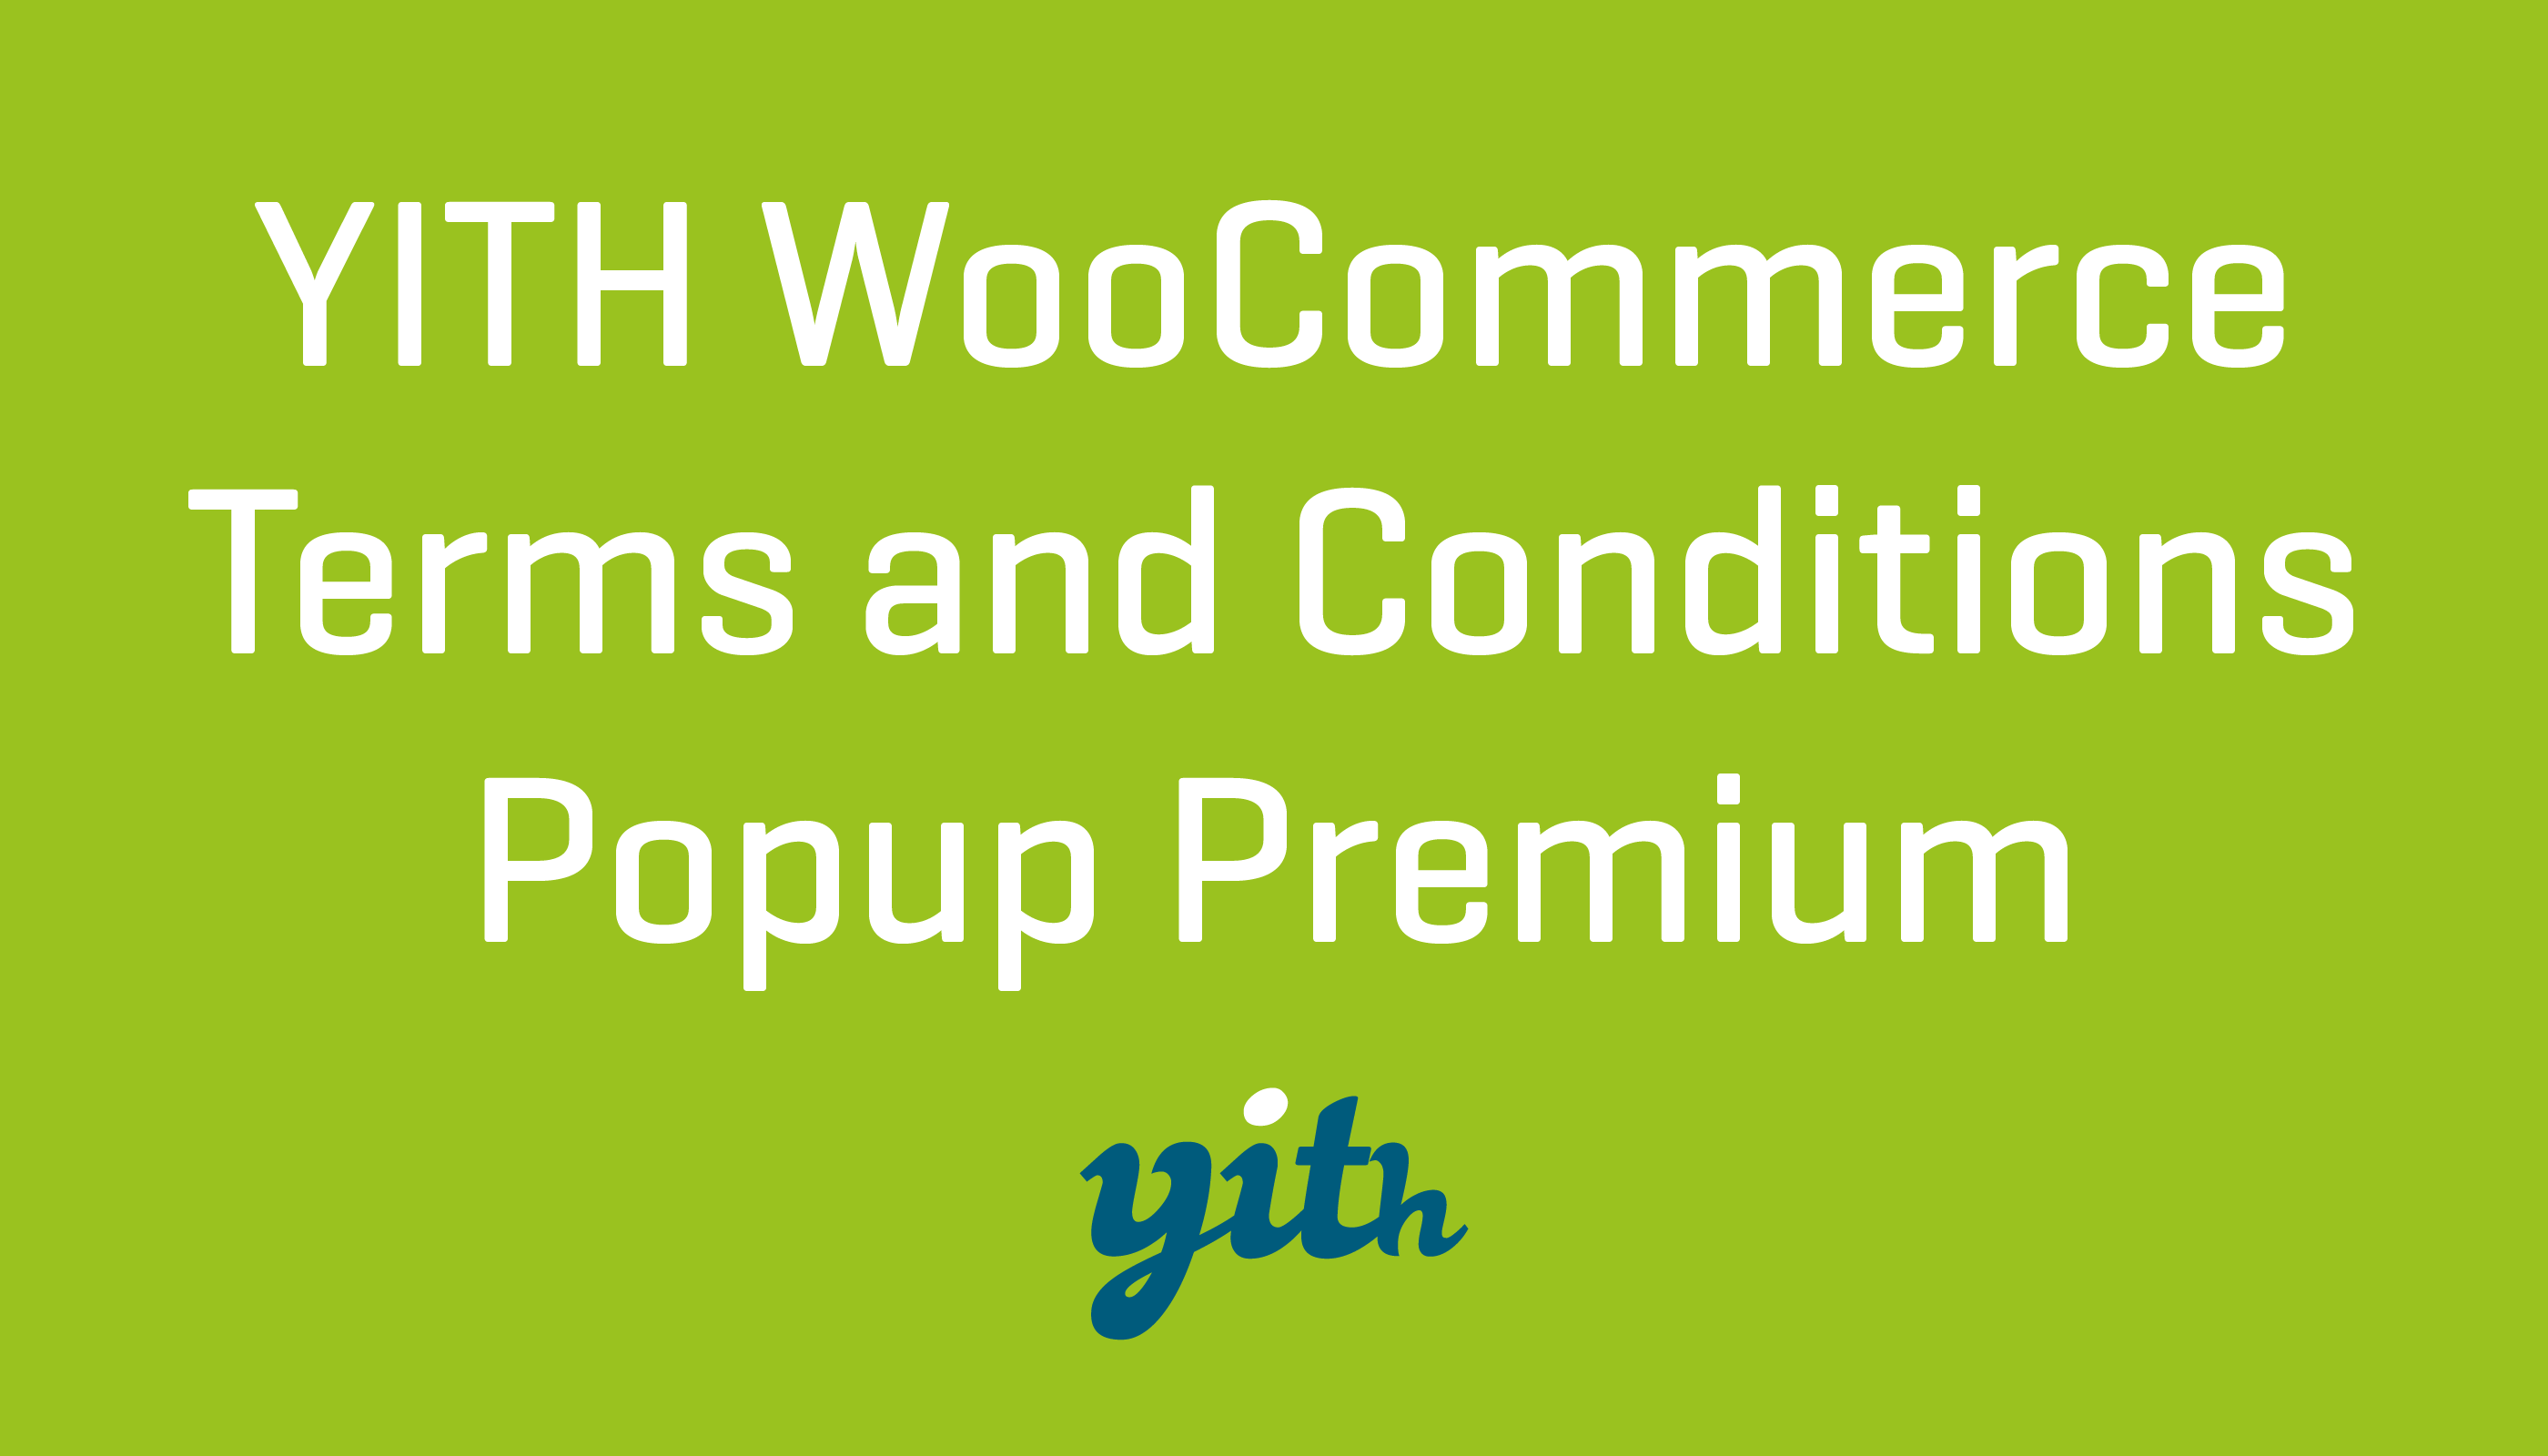 Yith WooCommerce Terms and Conditions Popup Premium